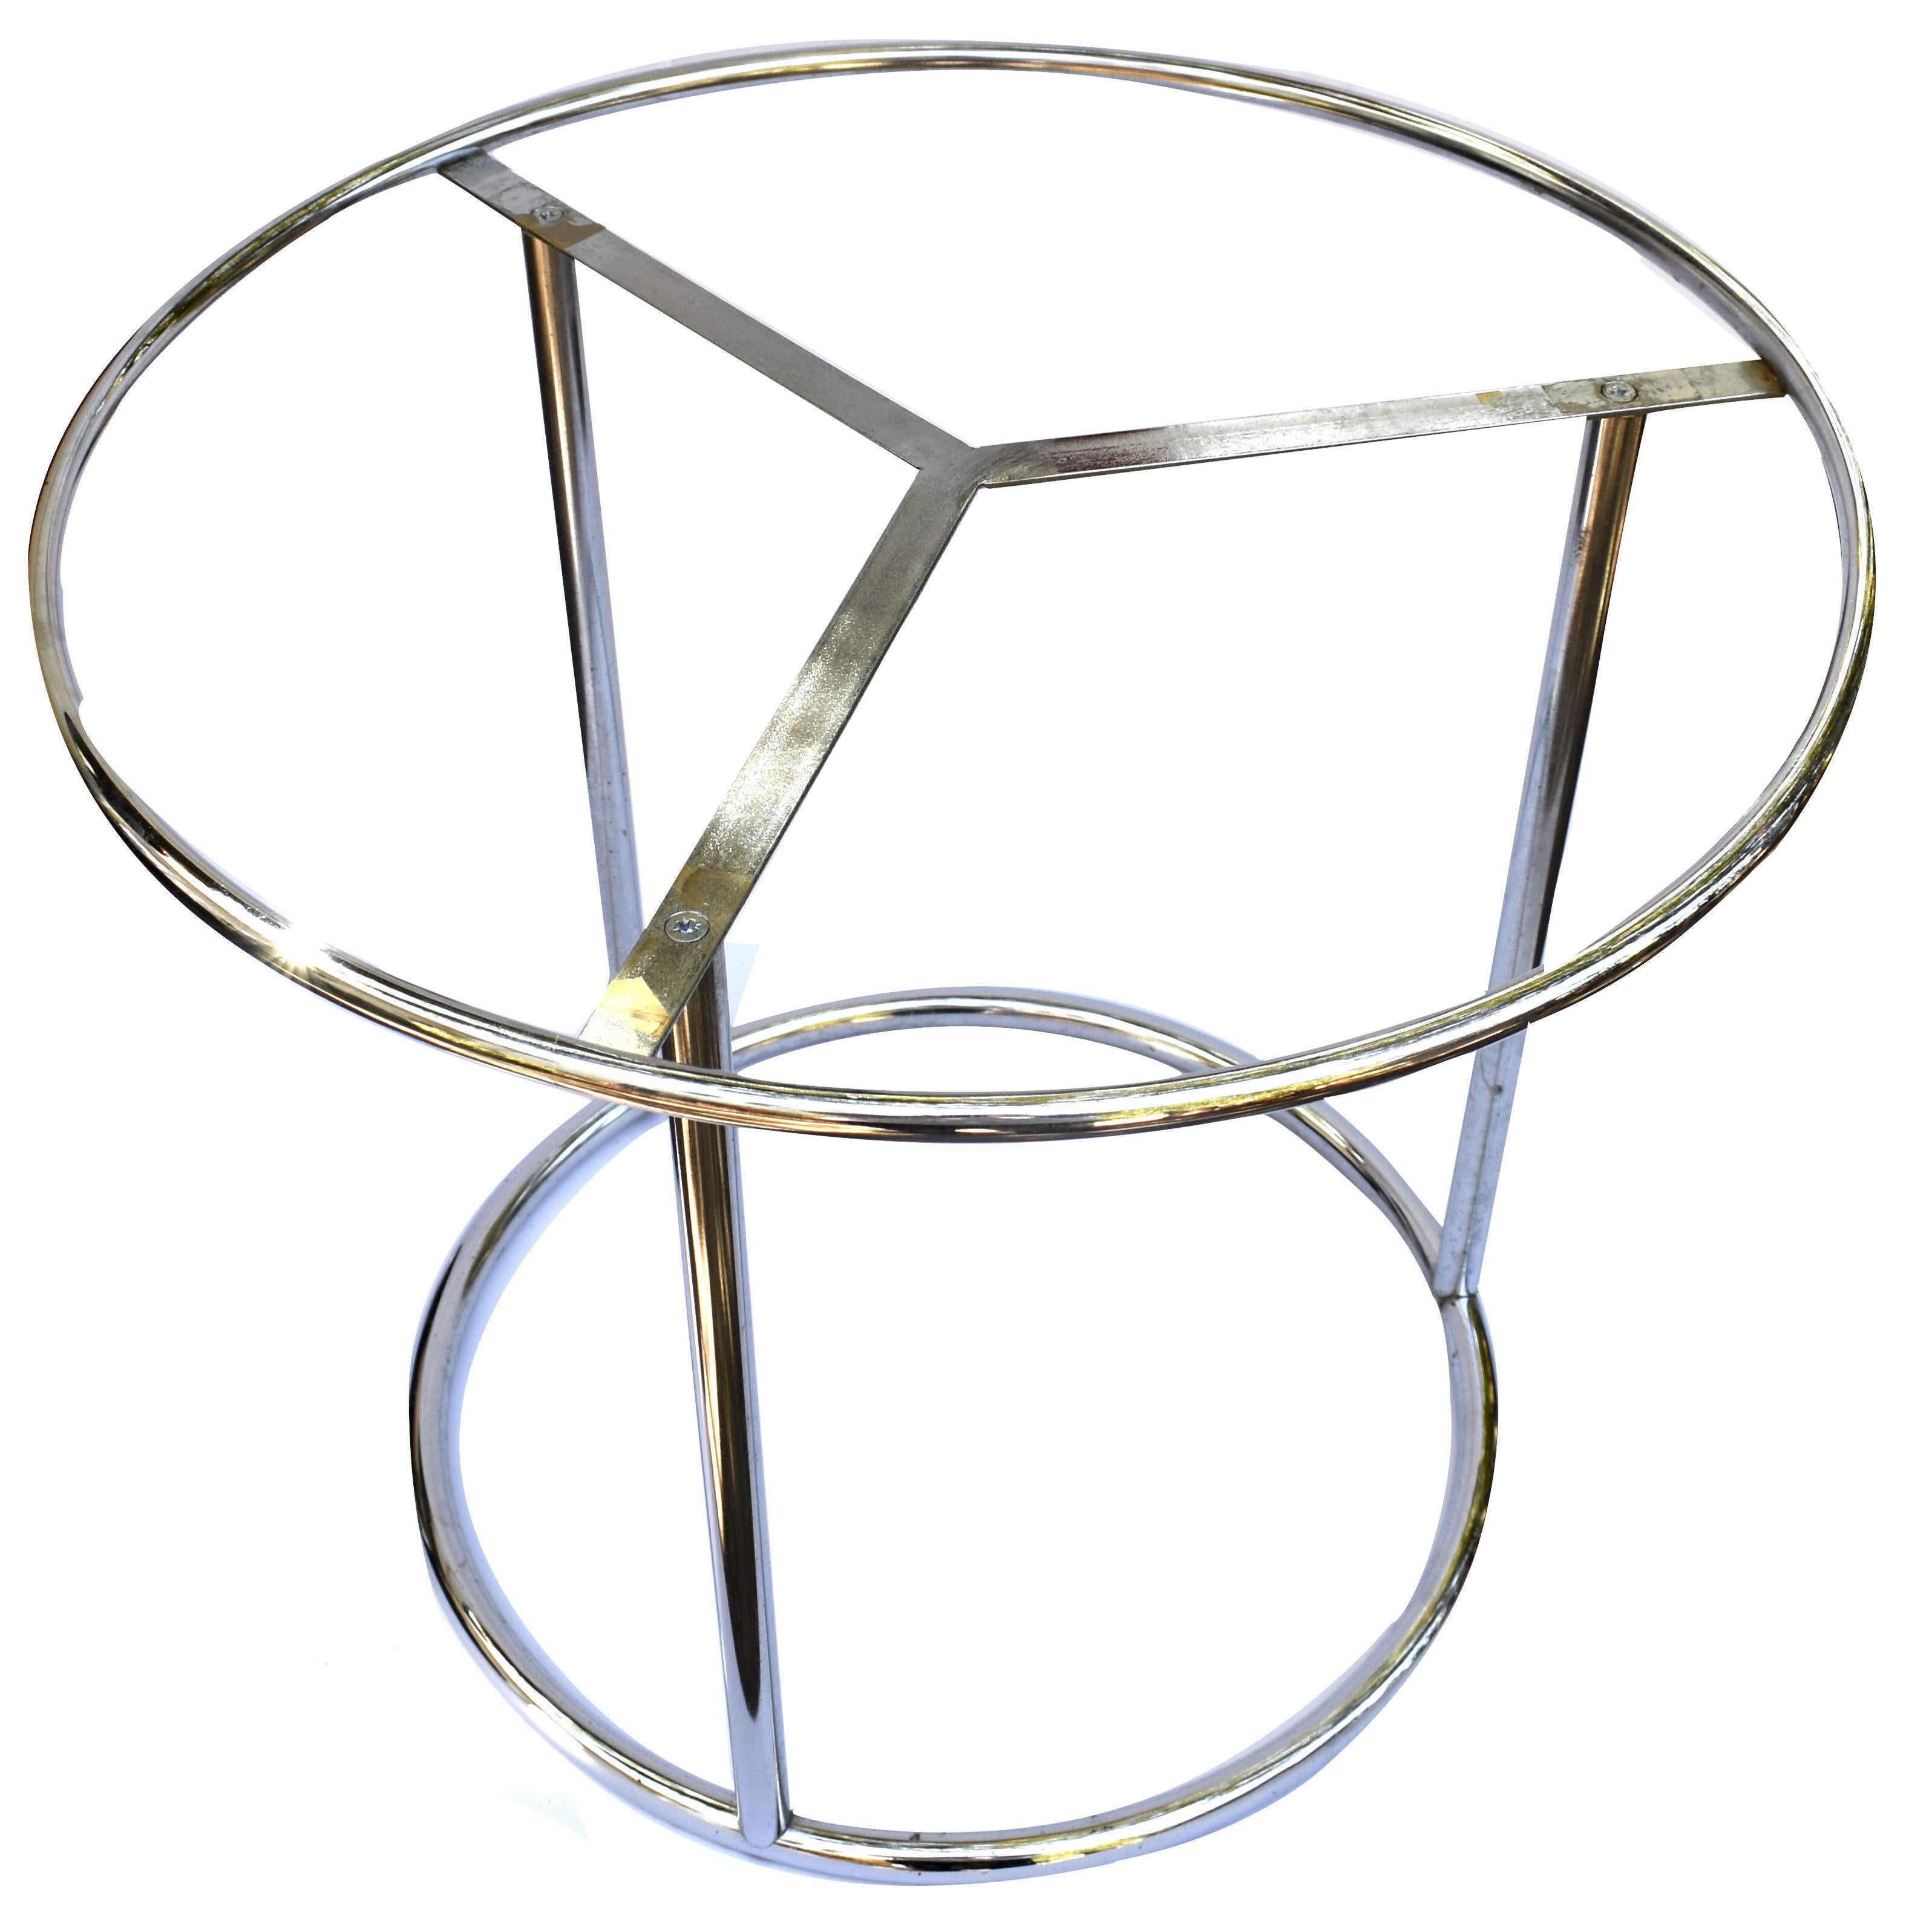 Art Deco Chrome & Glass Modernist Occasional Cocktail Table, English, C1930's For Sale 3